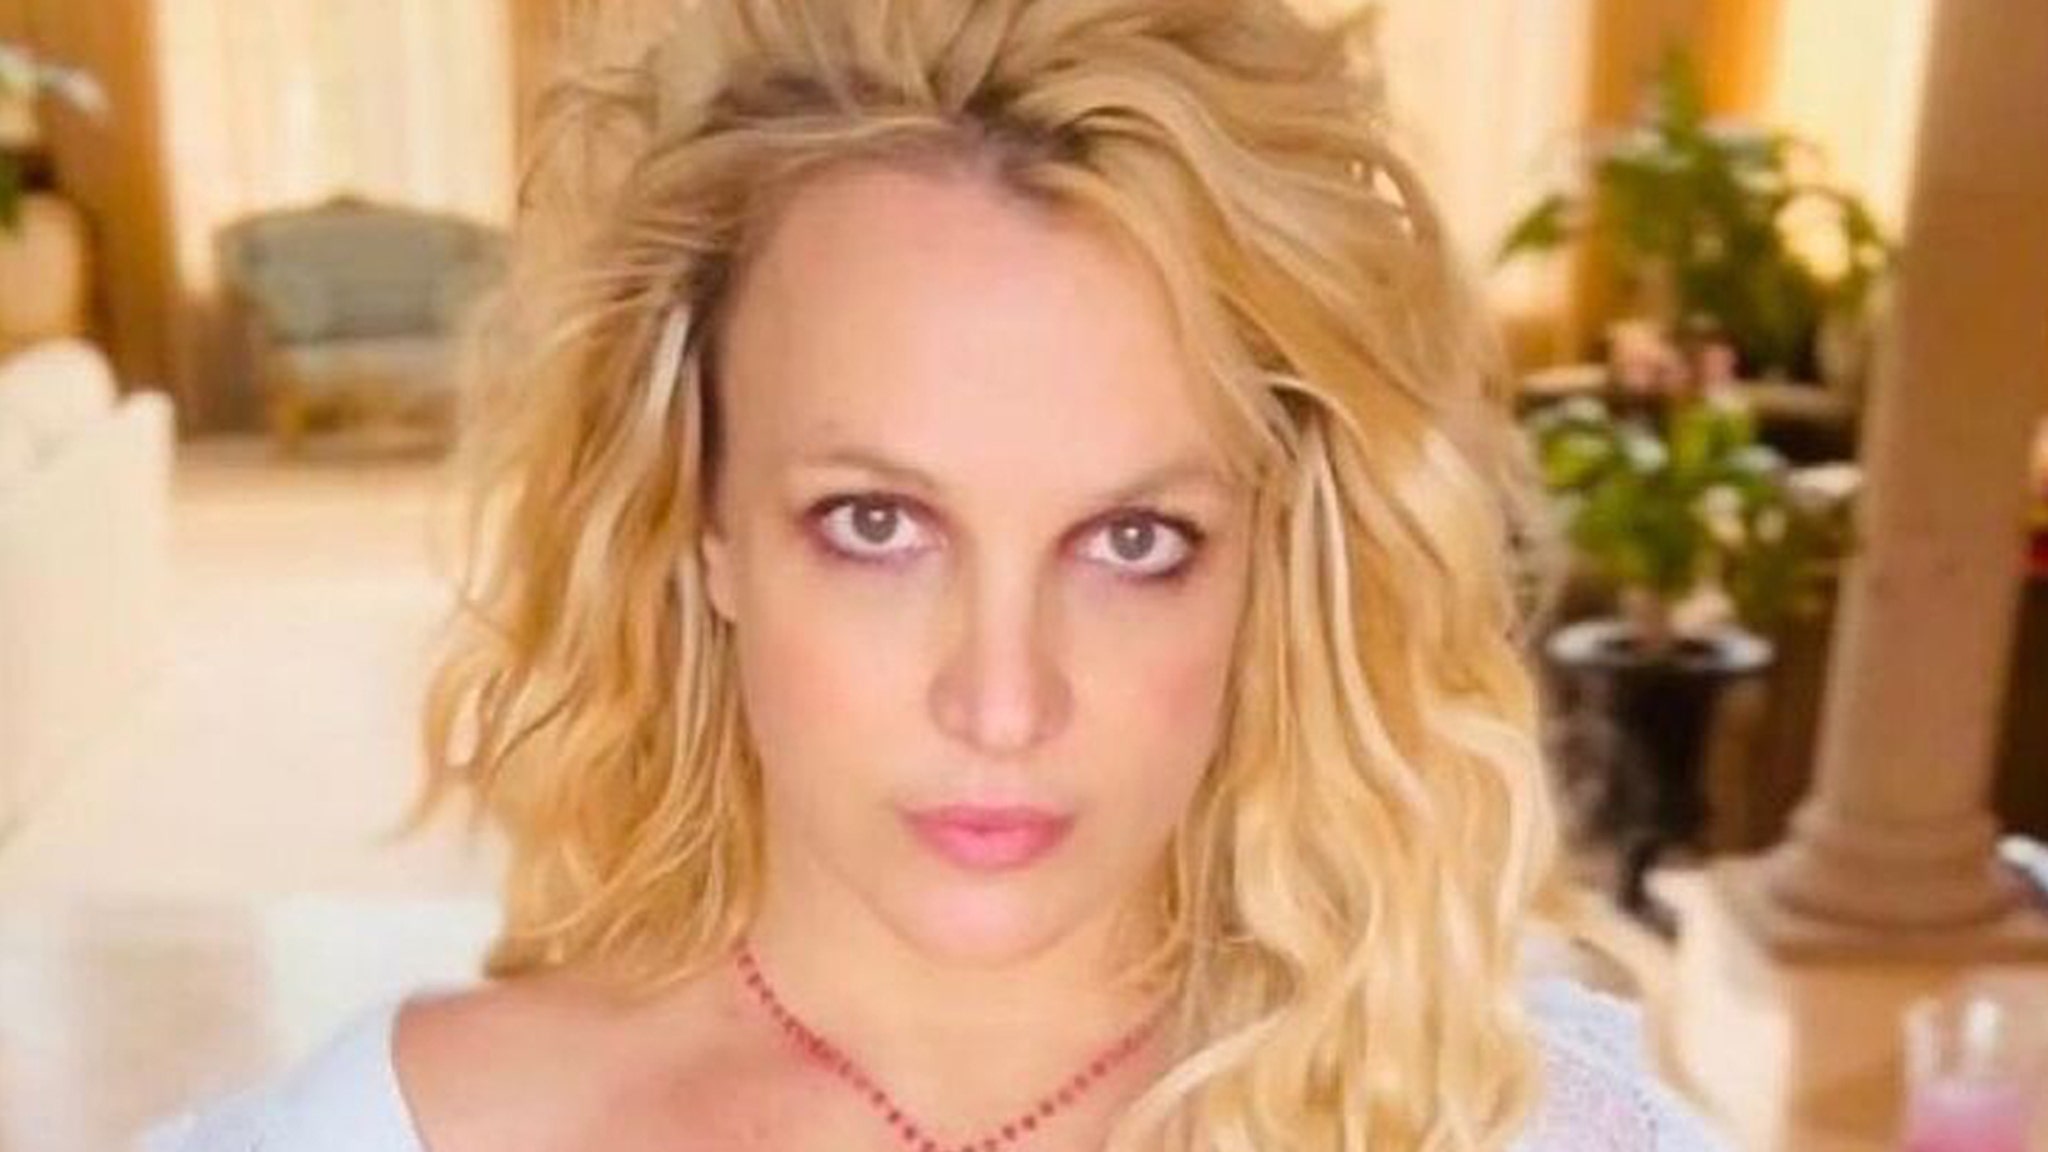 Britney Spears Needs Conservatorship, New Reporting on Drugs & Surveillance